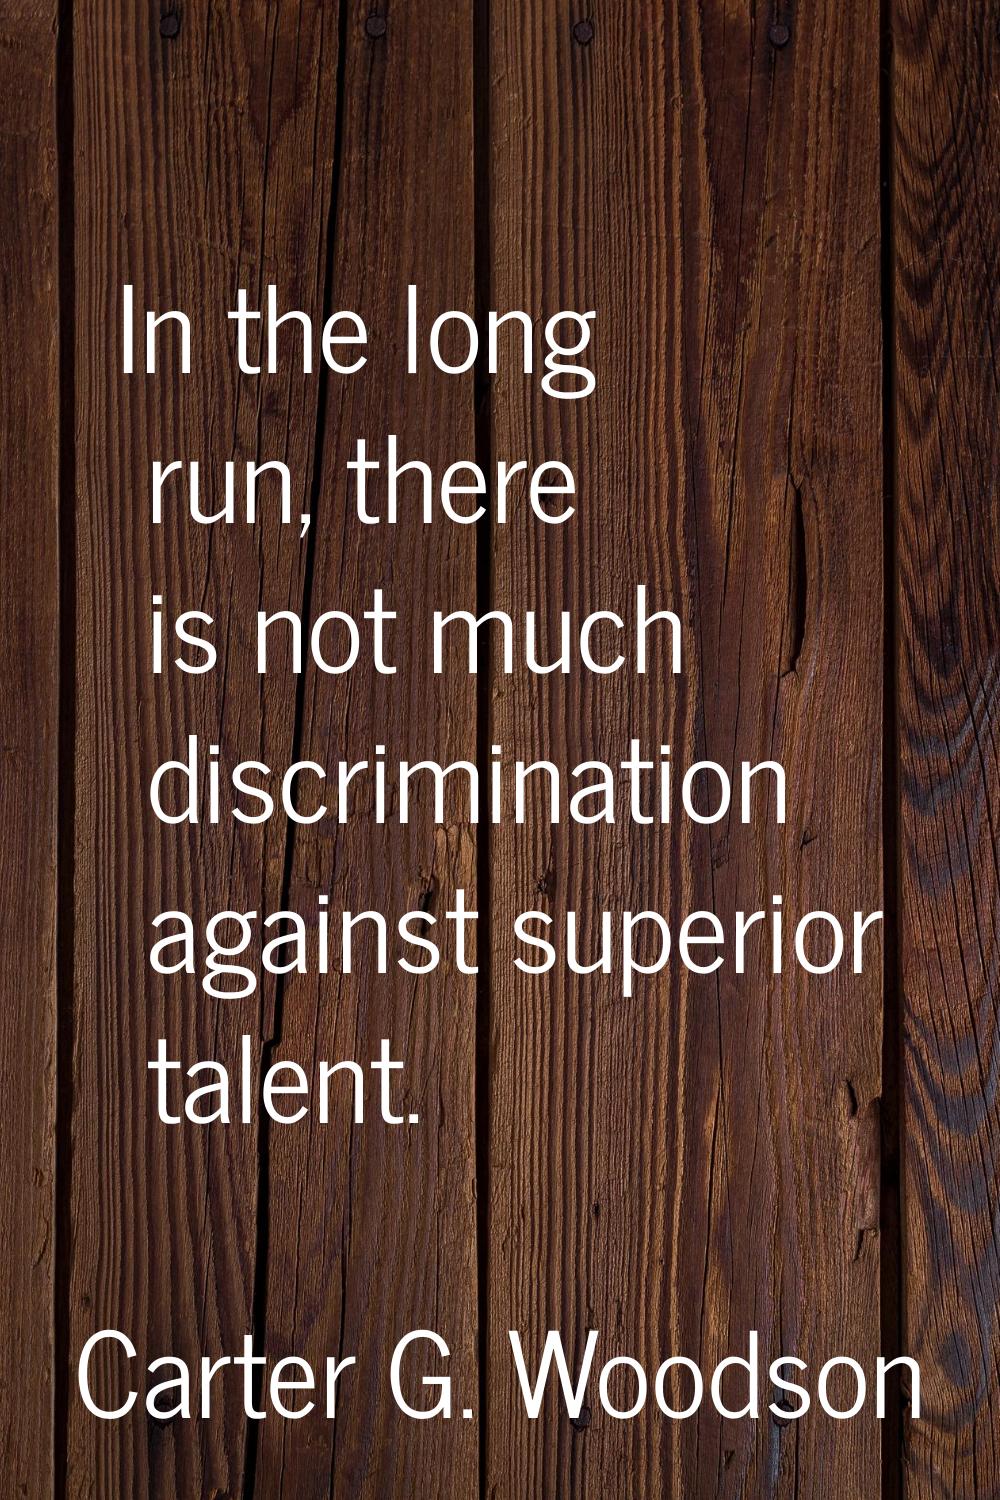 In the long run, there is not much discrimination against superior talent.